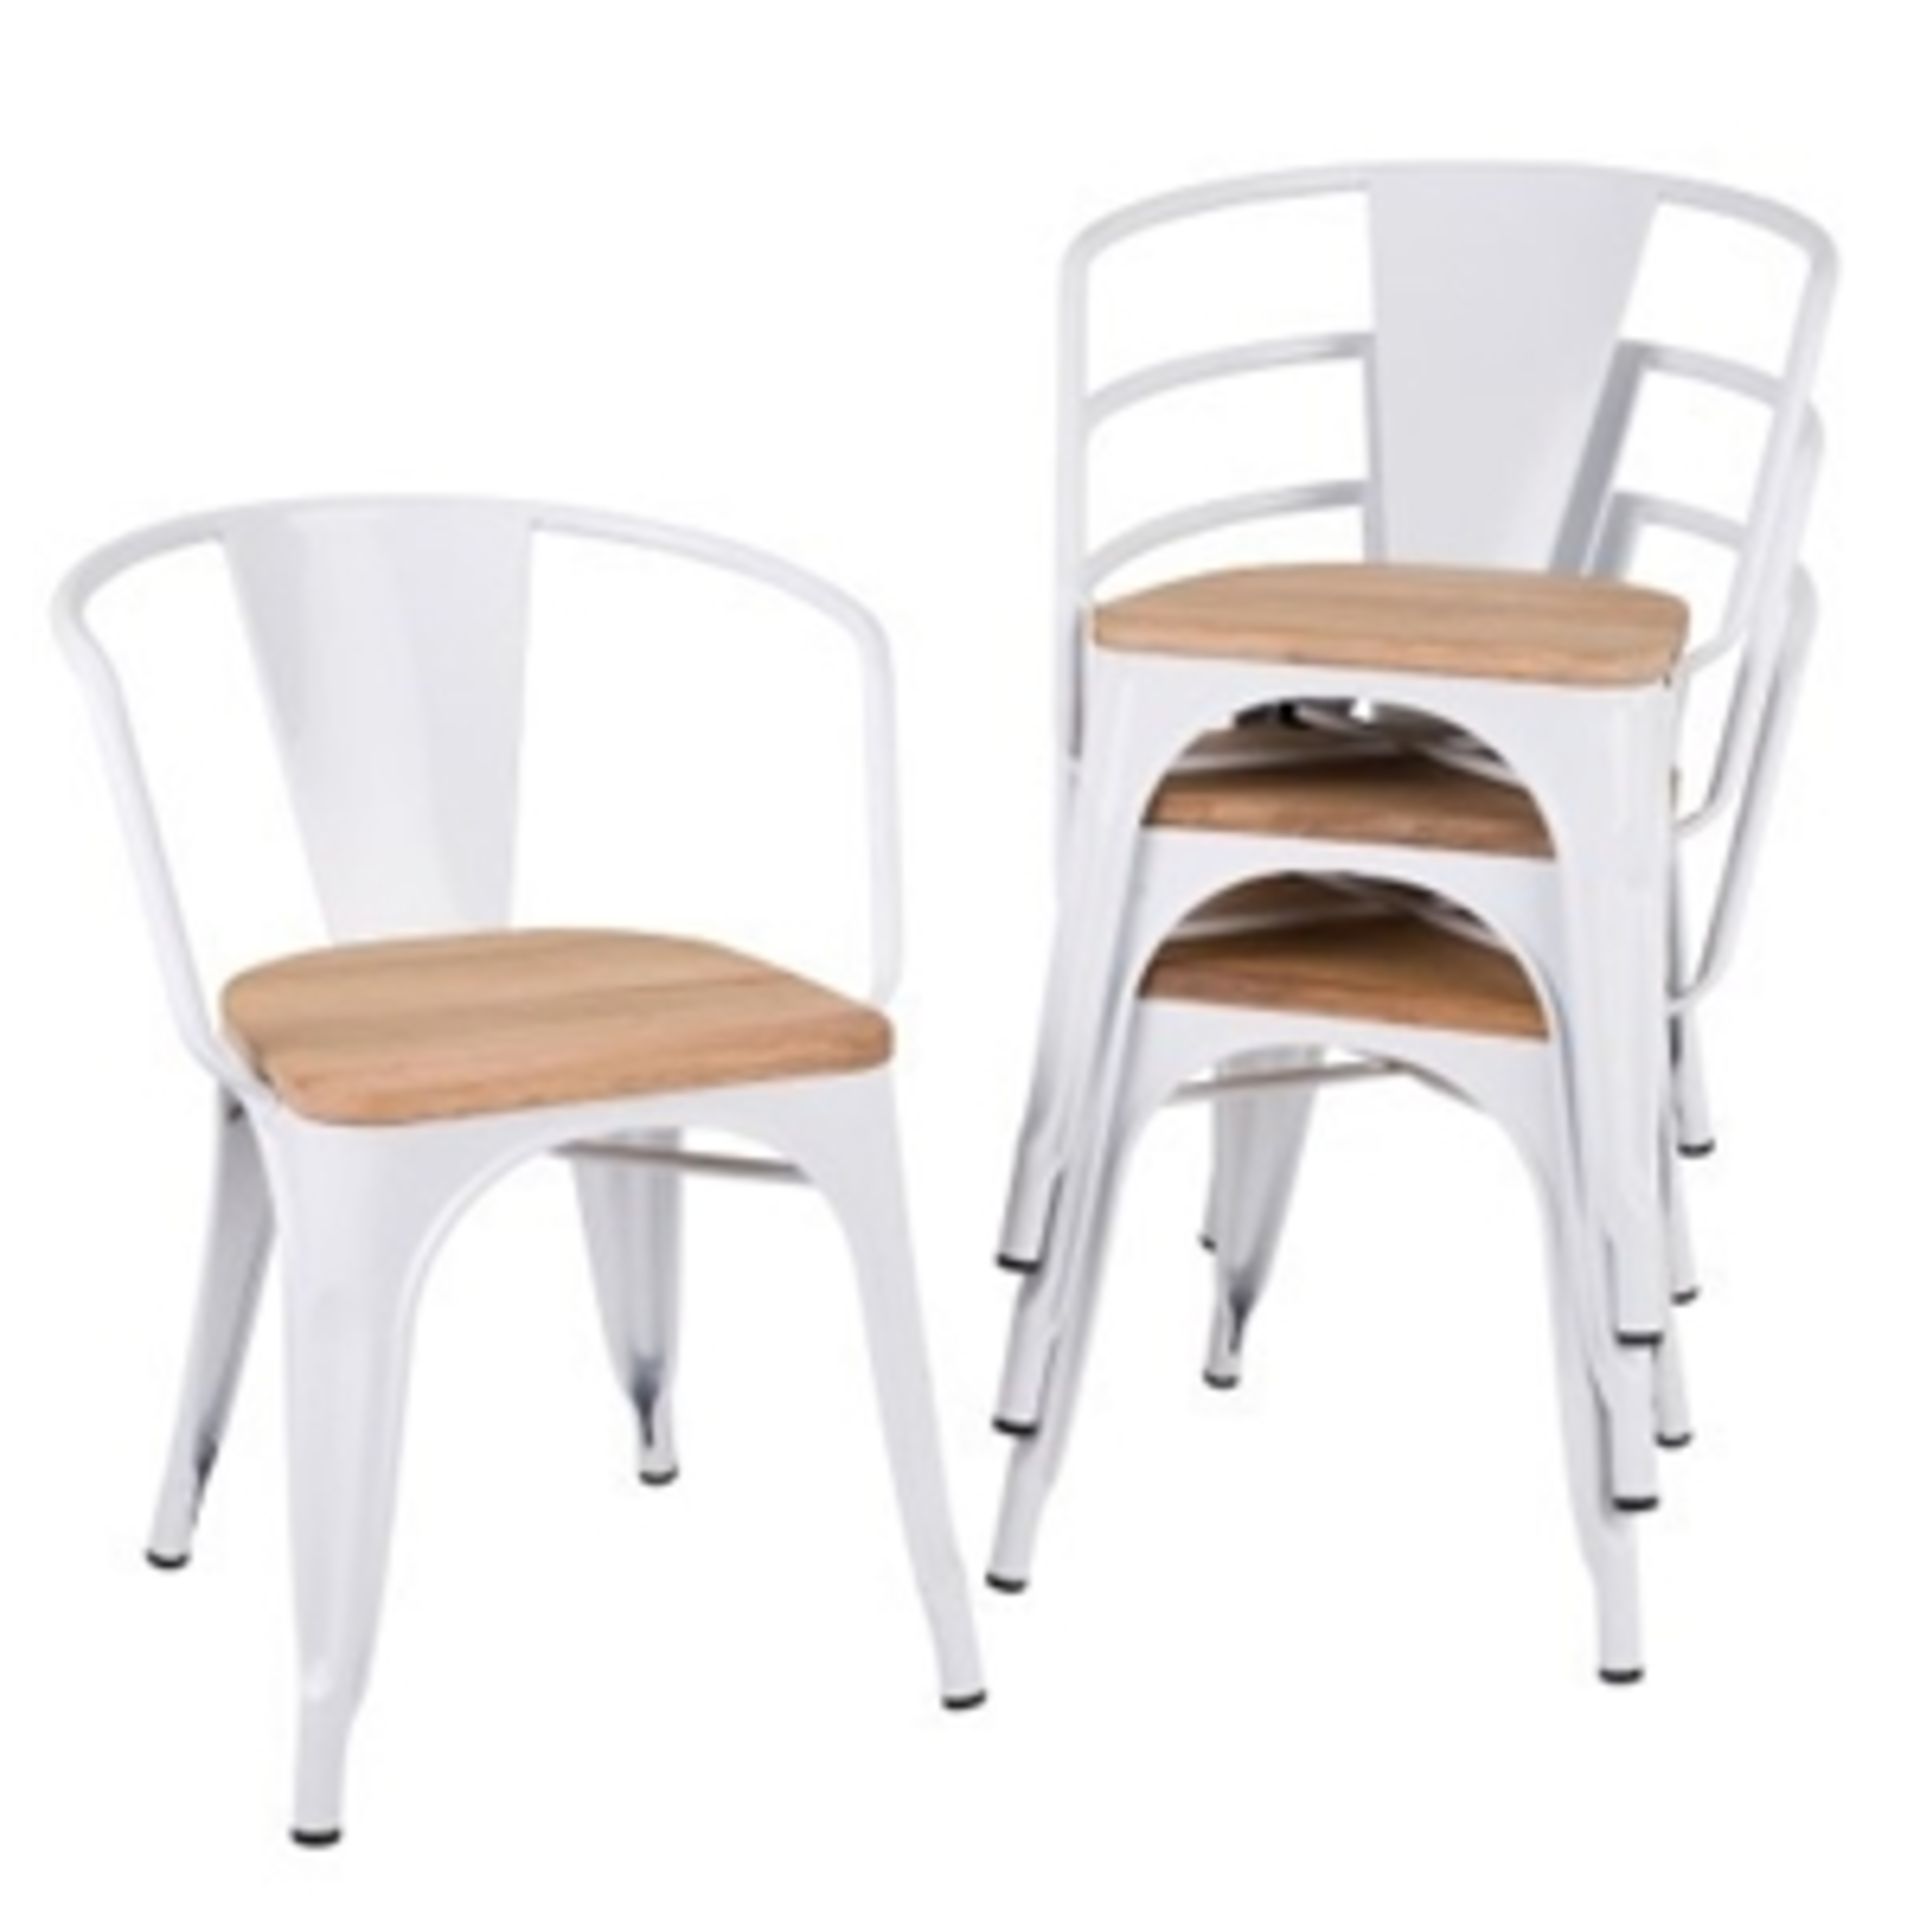 4 x Industrial Tolix Style Stackable Chairs With Armrests and Wooden Seats - Finish: WHITE/PINE - - Image 4 of 5